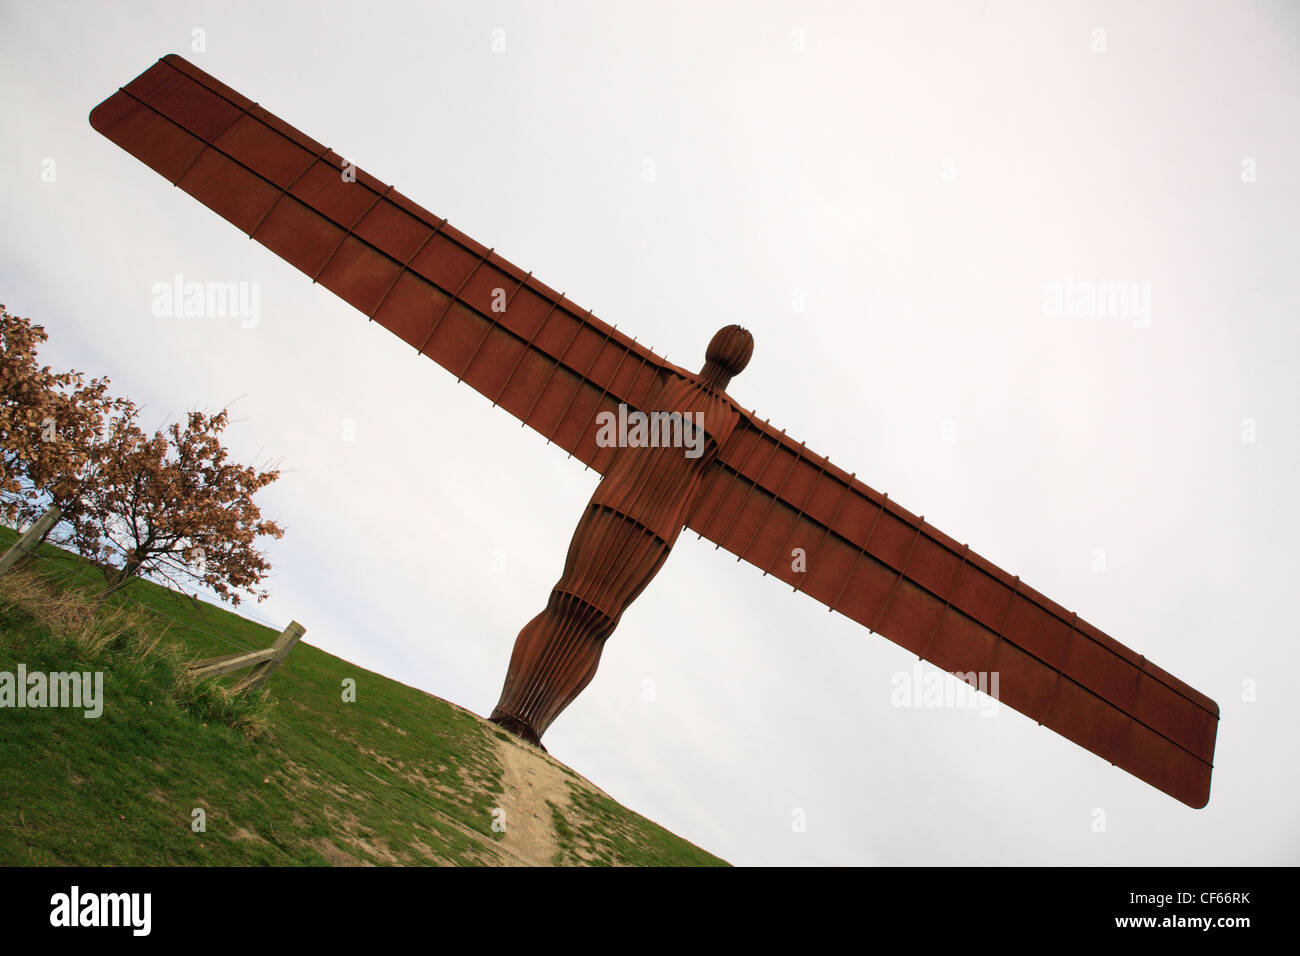 The Angel of the North in Gateshead. Stock Photo